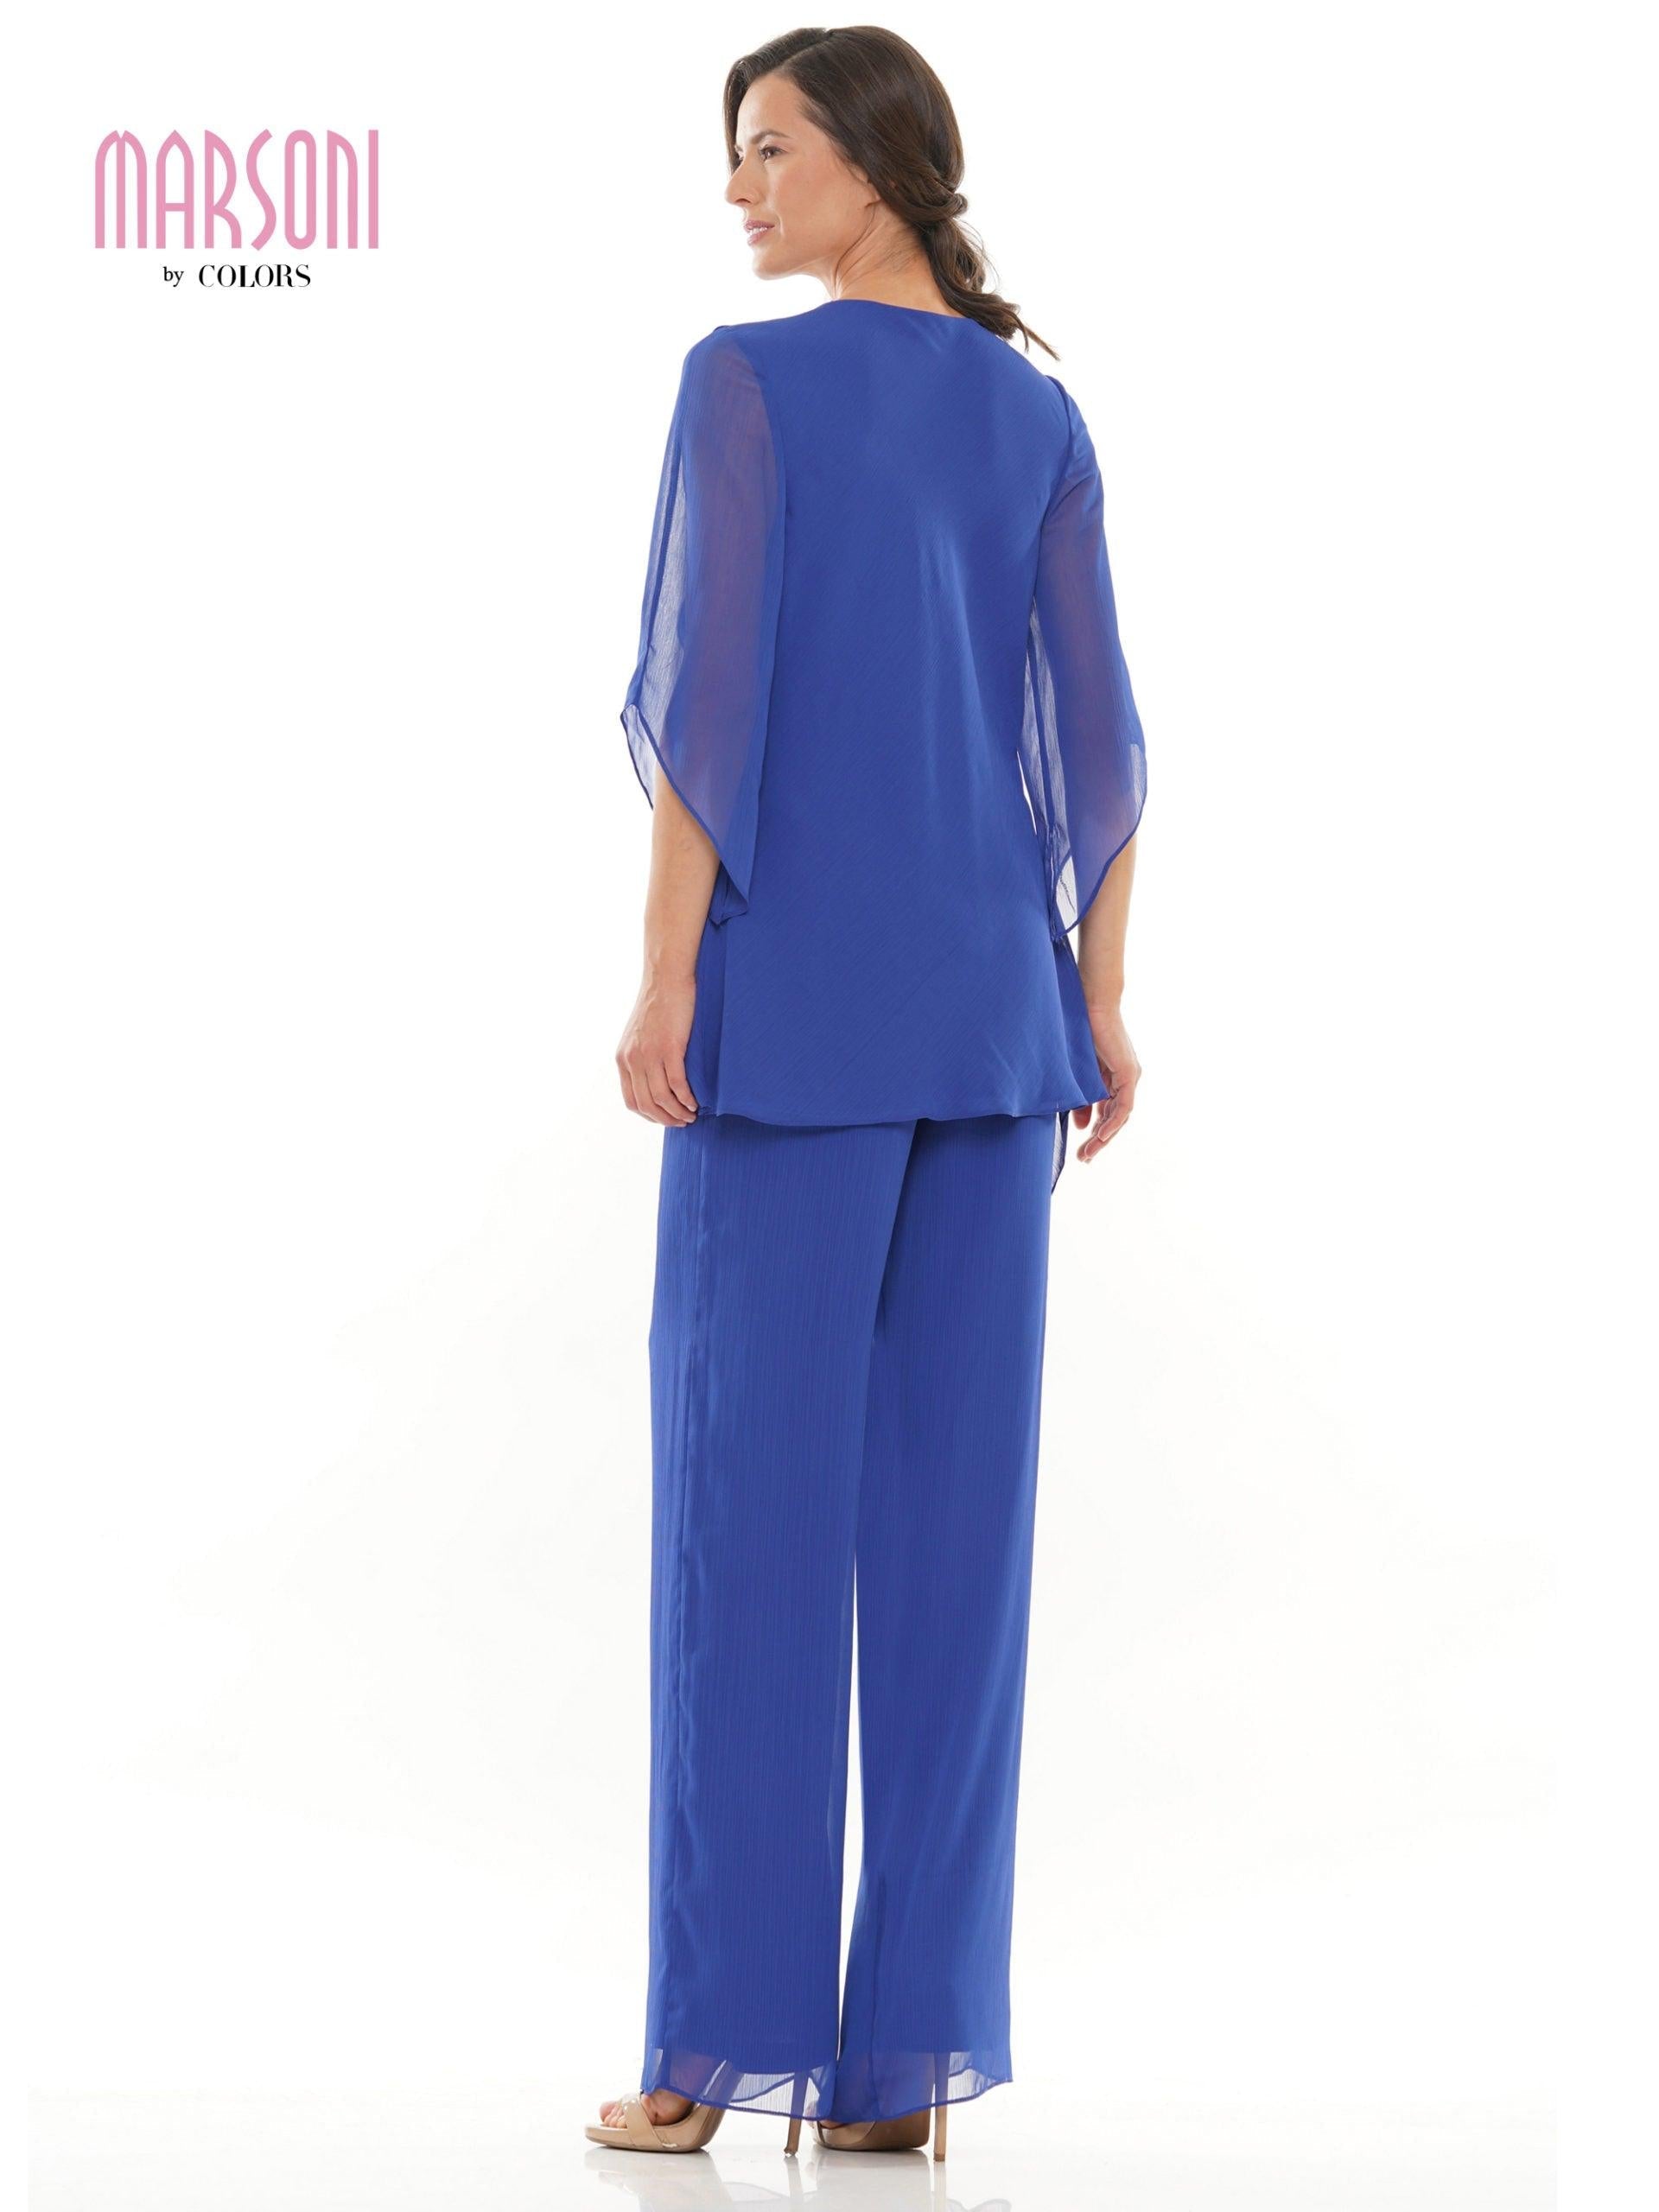 Marsoni Formal Mother of the Bride Pant Suit 308 | The Dress Outlet